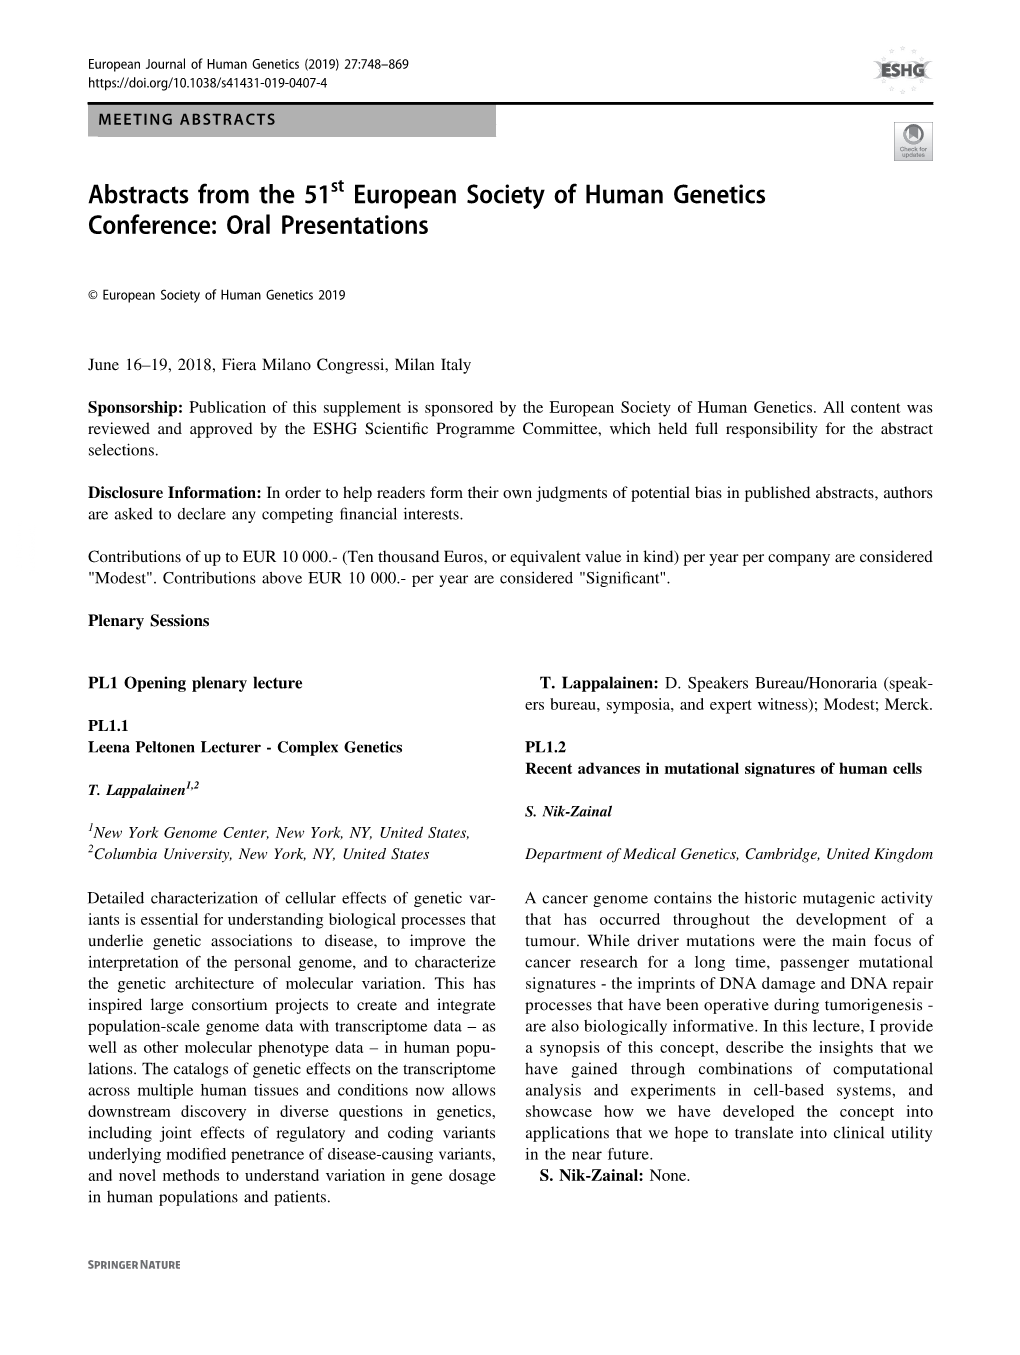 Abstracts from the 51St European Society of Human Genetics Conference: Oral Presentations